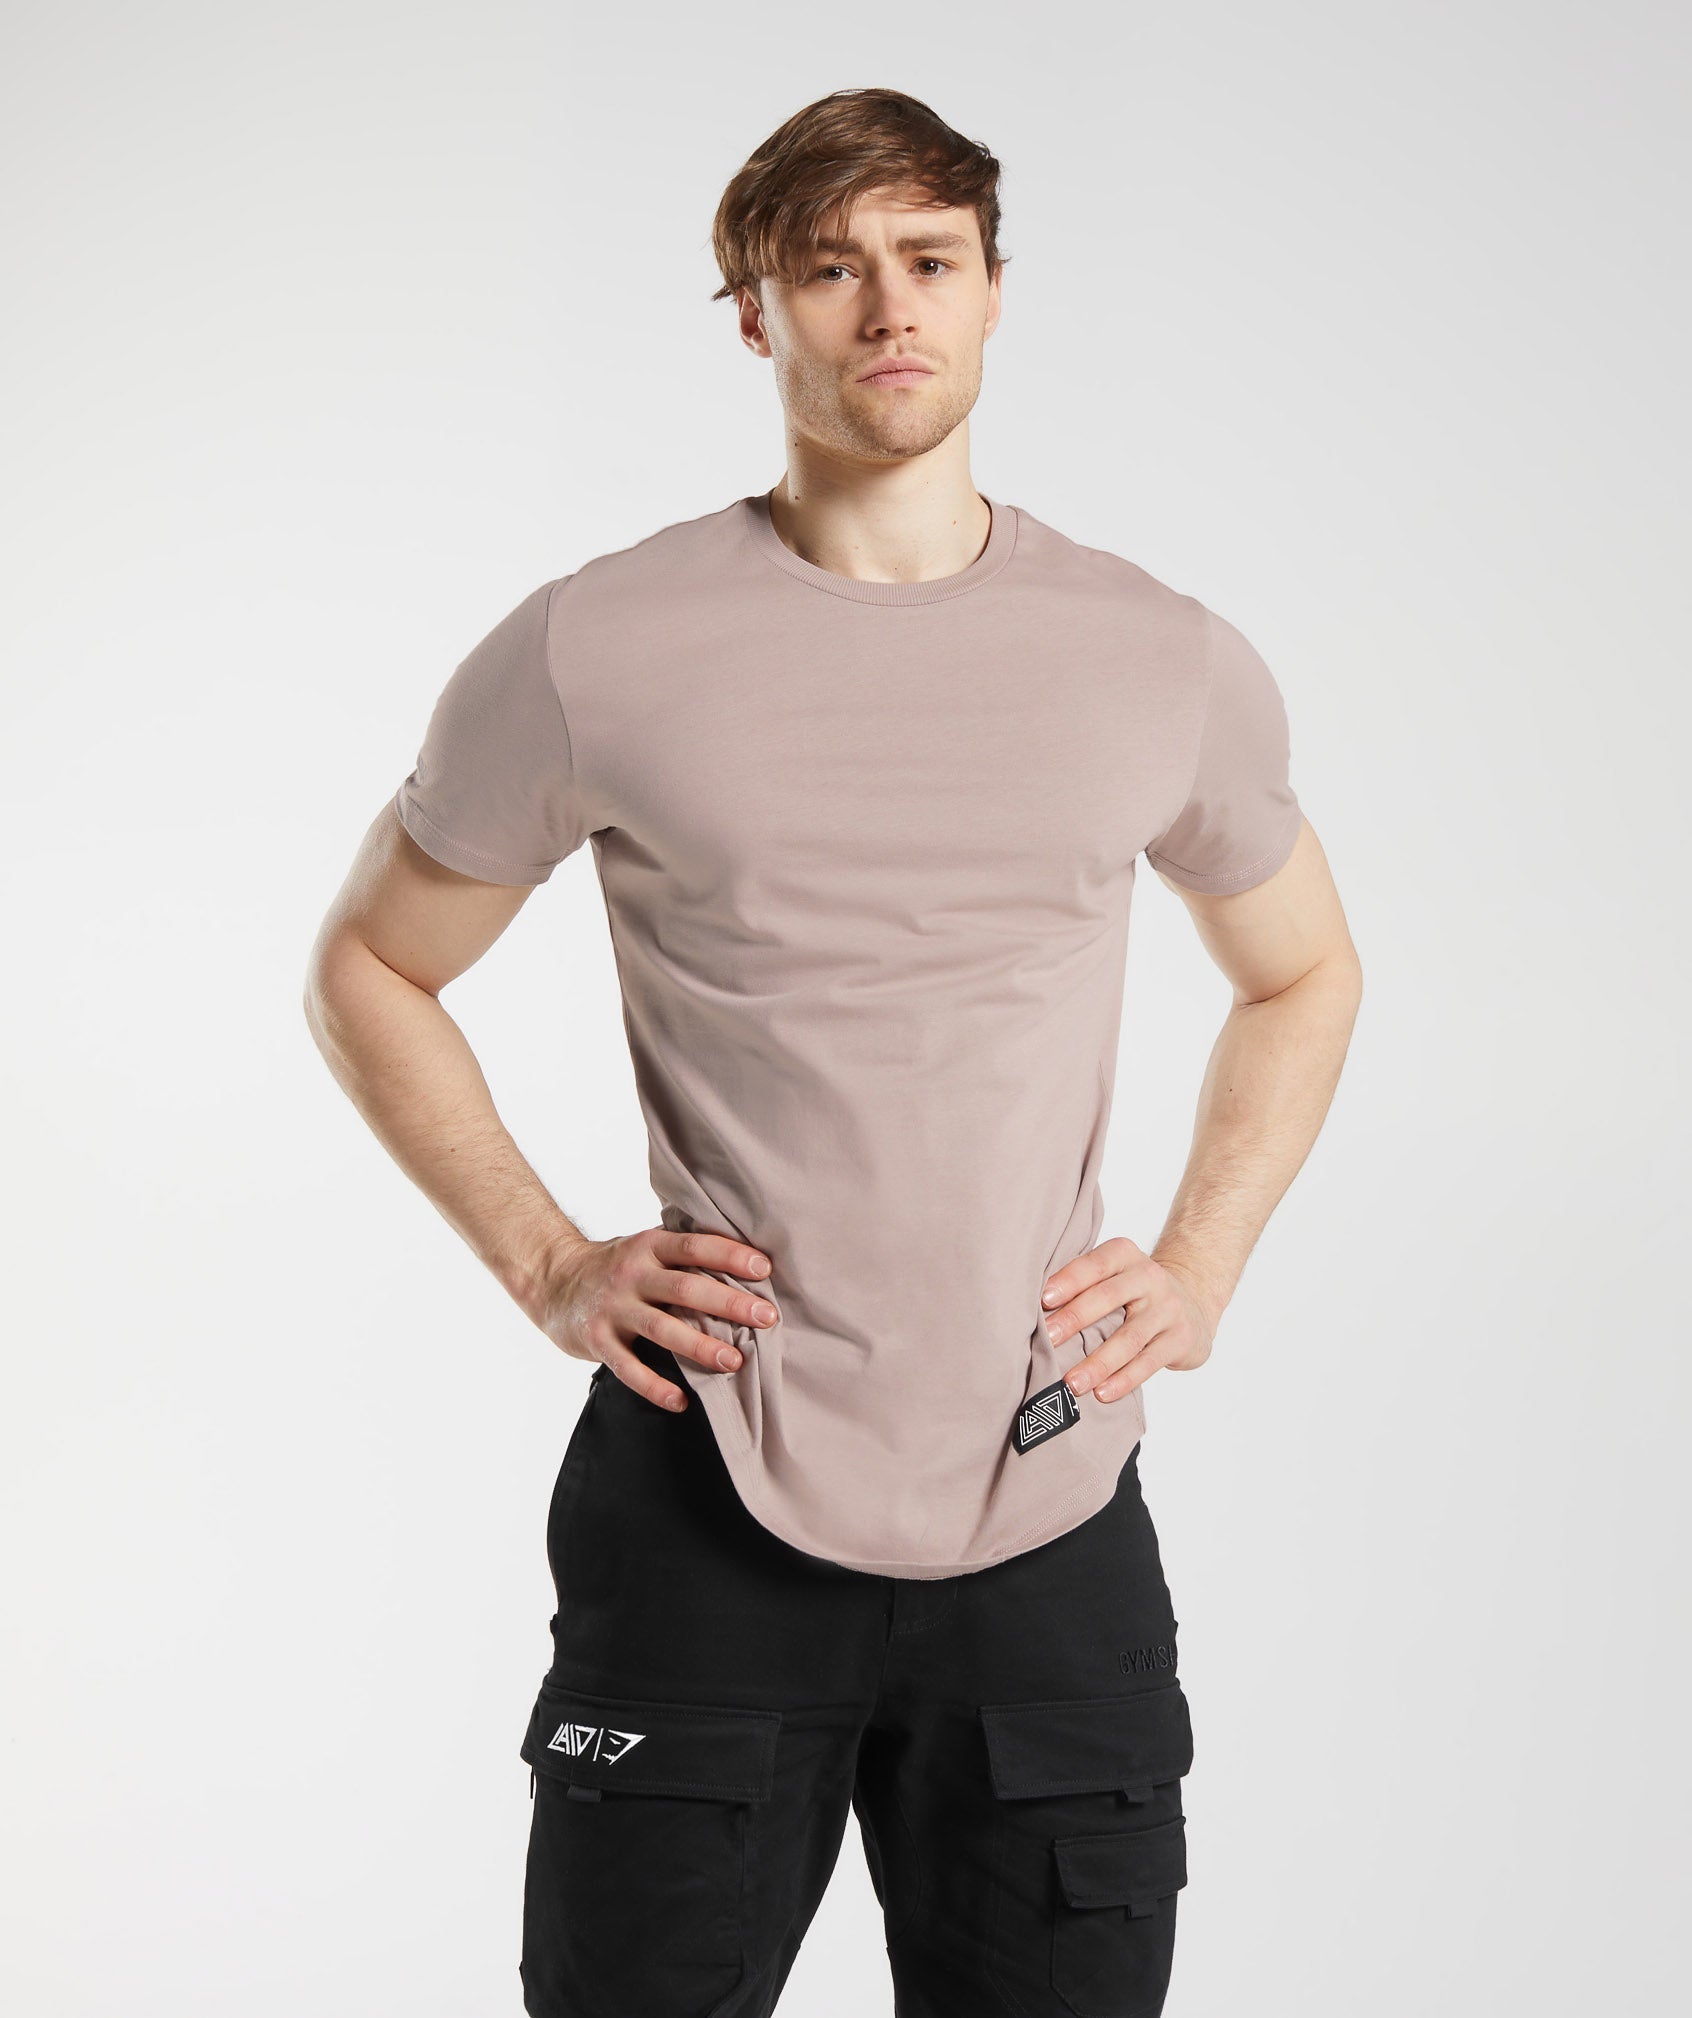 The David Laid x Gymshark Collection – Gymshark